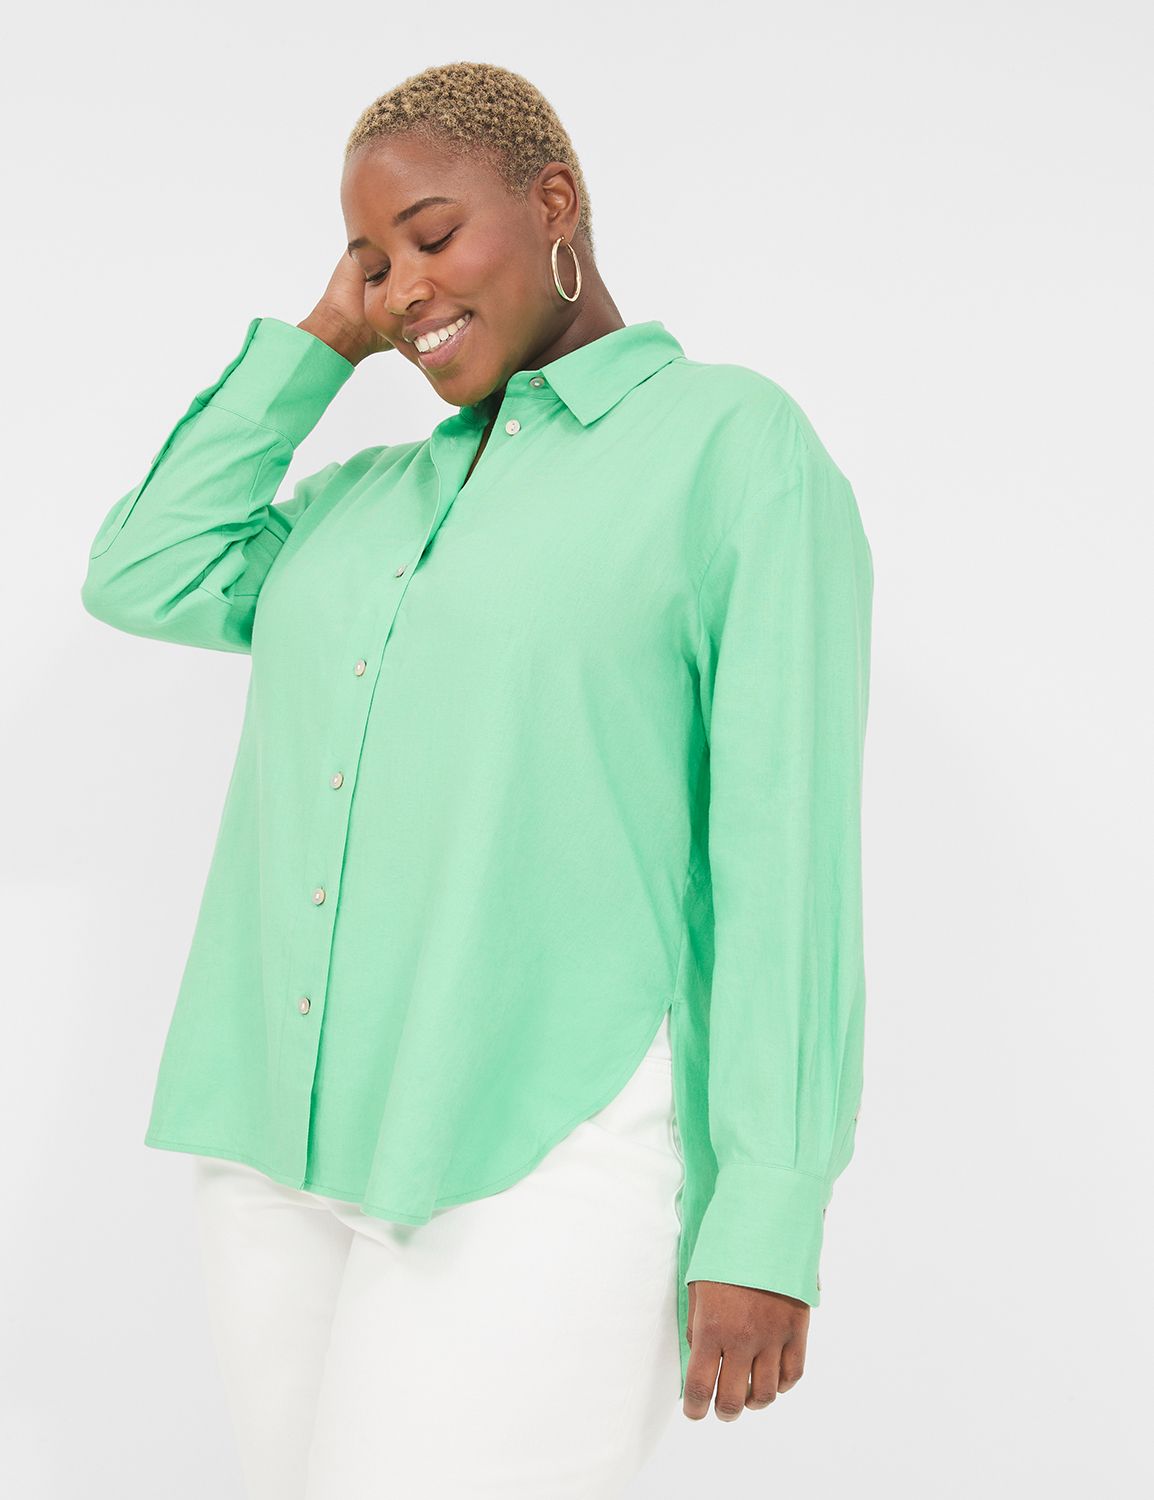 Comfy Dressy Flowy Hide Belly Long Shirt Long Sleeve Shirts Button Down  Collared Solid Tunic Tops to Wear with Leggings Plus Size Tops for Women  Light Blue L 